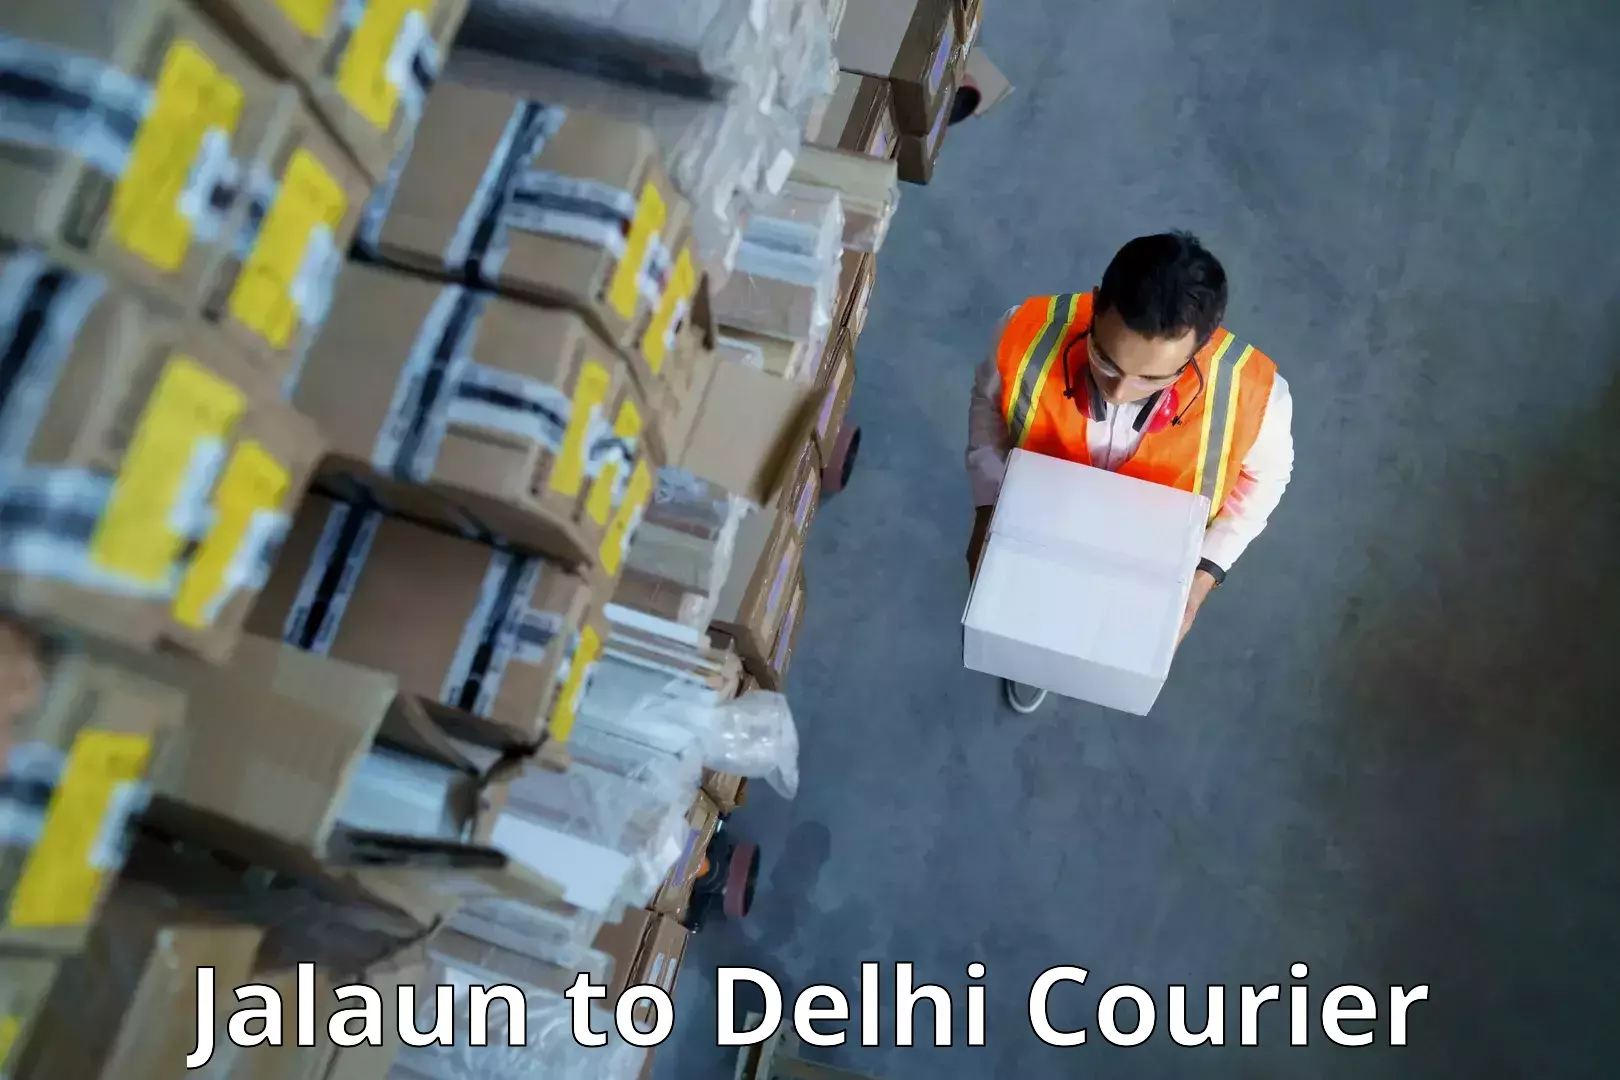 Versatile courier offerings Jalaun to NCR